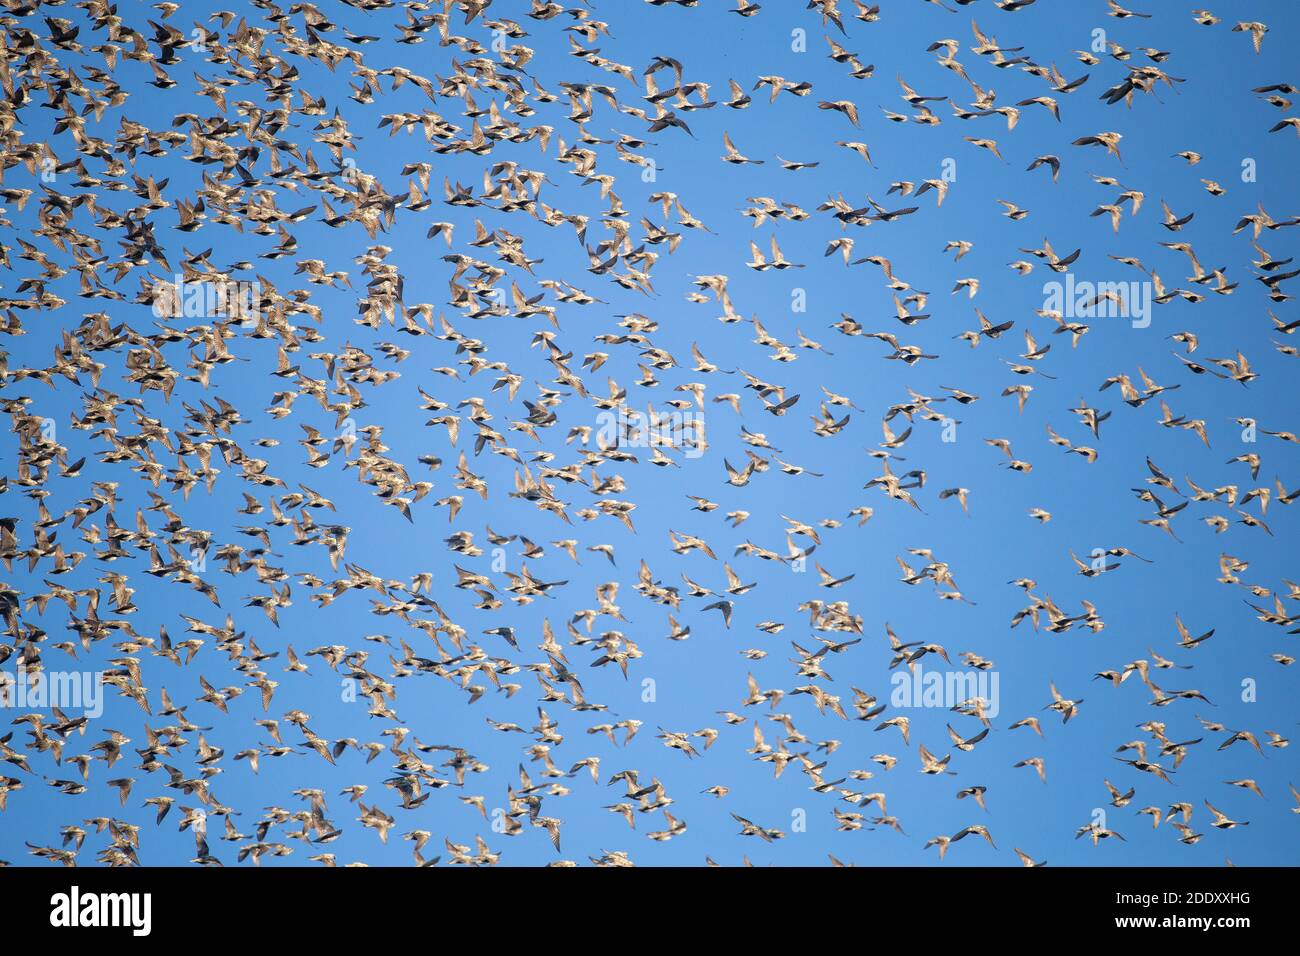 Starlings flying in the sky Stock Photo